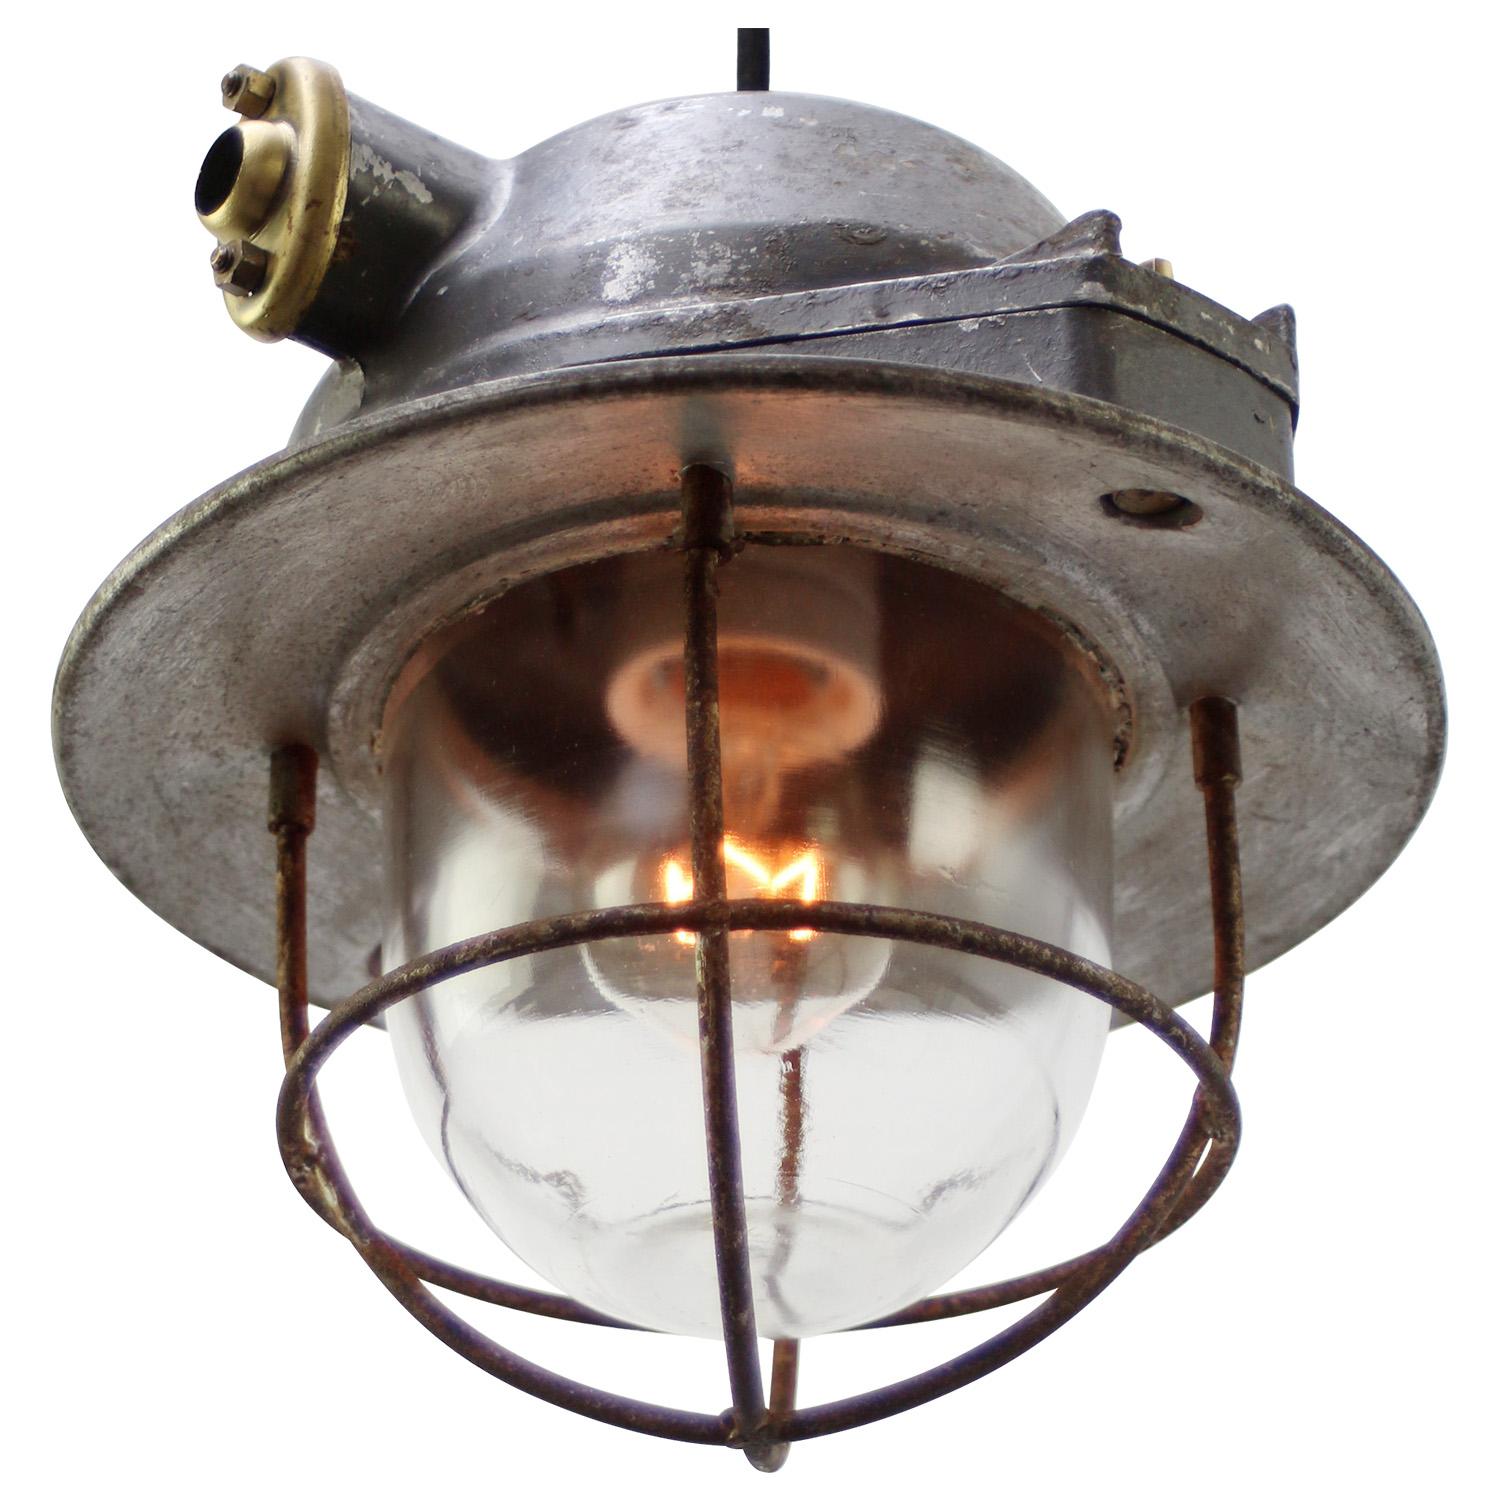 Industrial hanging lamp by EMD, France.
Cast aluminium, brass and frosted glass

Weight 3.65 kg / 8 lb

Priced per individual item. All lamps have been made suitable by international standards for incandescent light bulbs, energy-efficient and LED